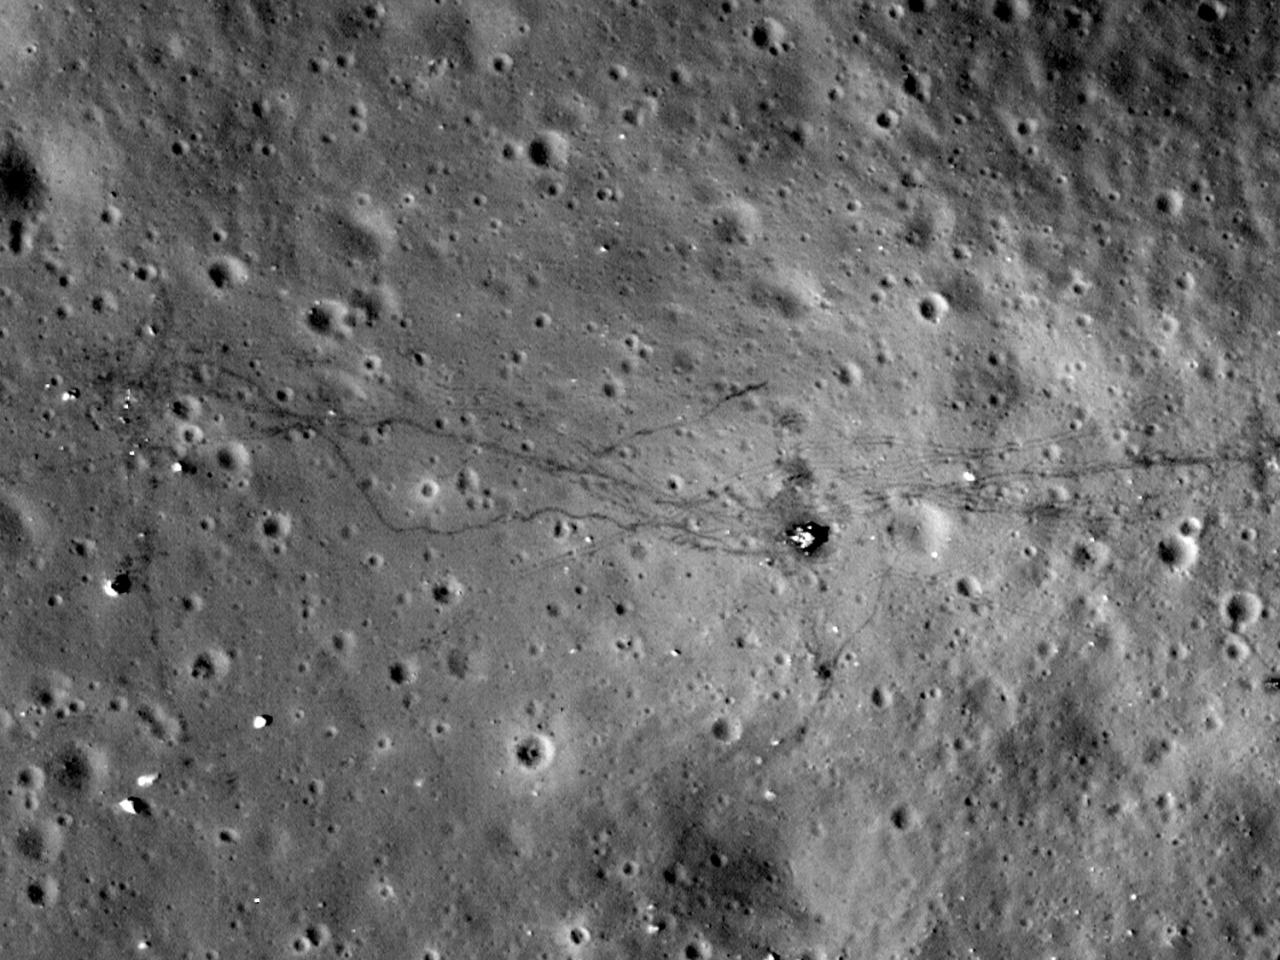 Apollo moon tracks, trash in never before-seen images - CBS News